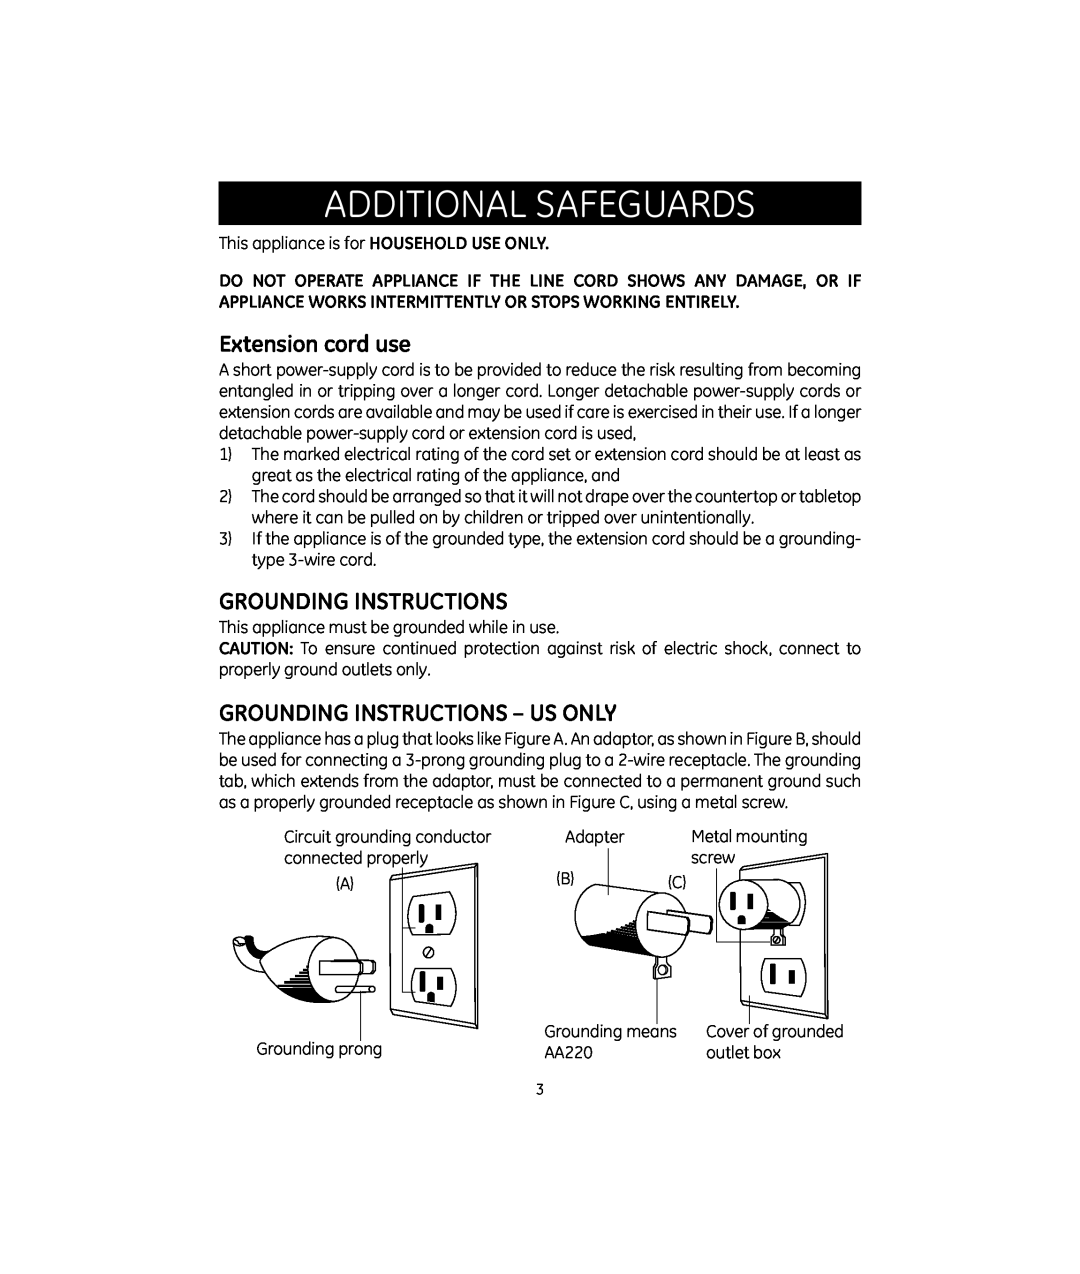 GE 681131692106 manual Additional Safeguards, Extension cord use, Grounding Instructions - Us Only 